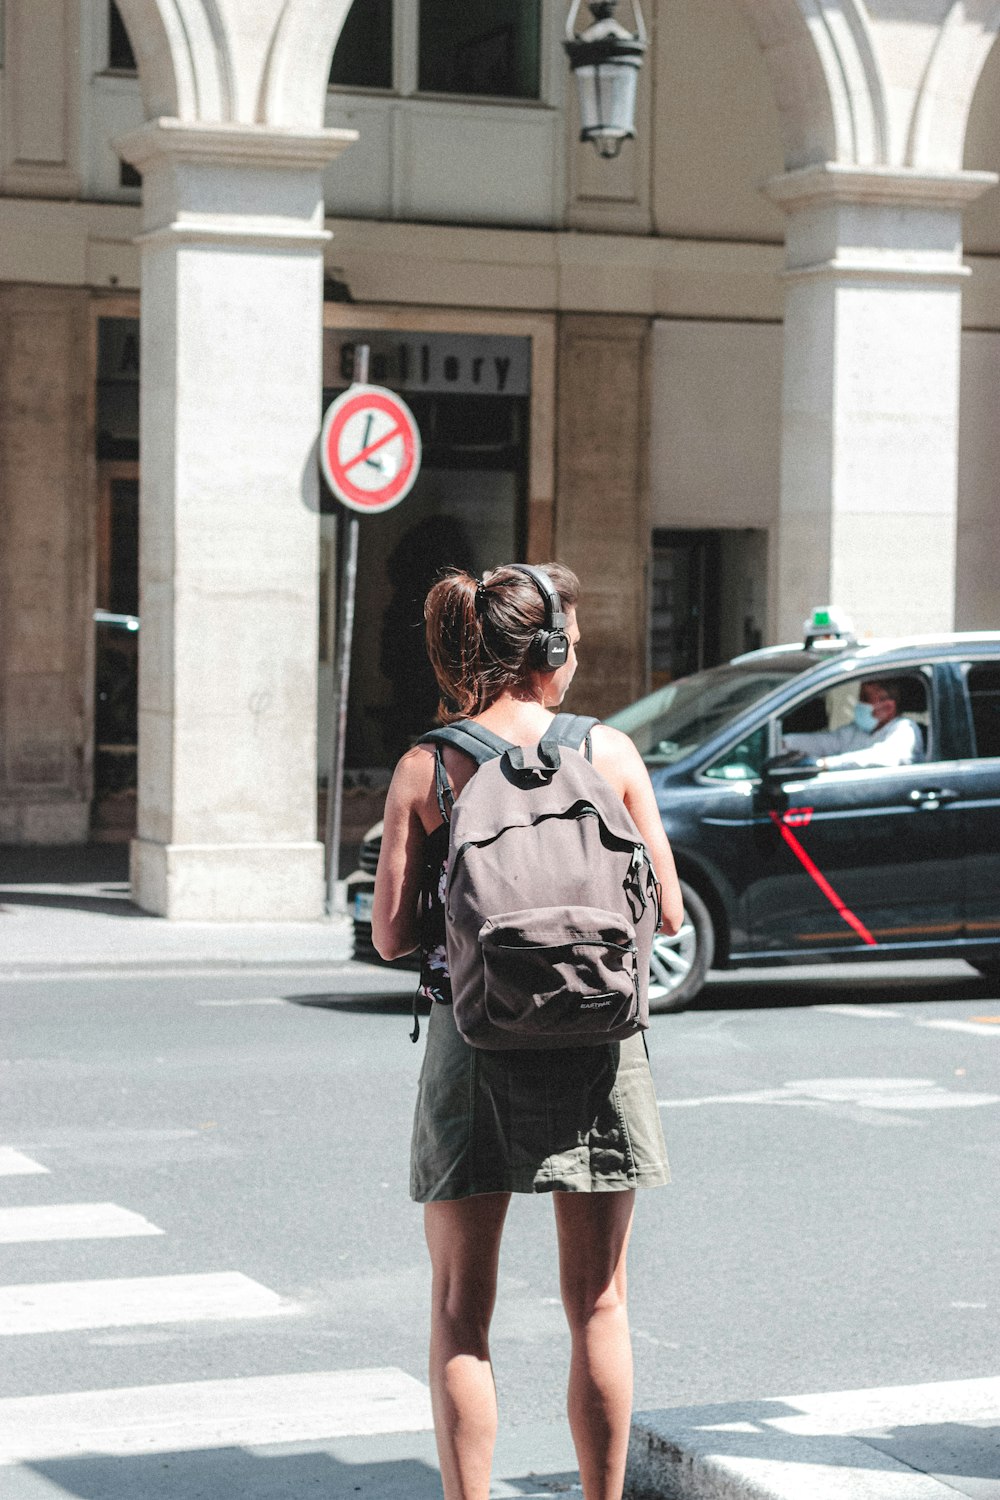 woman in black and red backpack standing on road during daytime